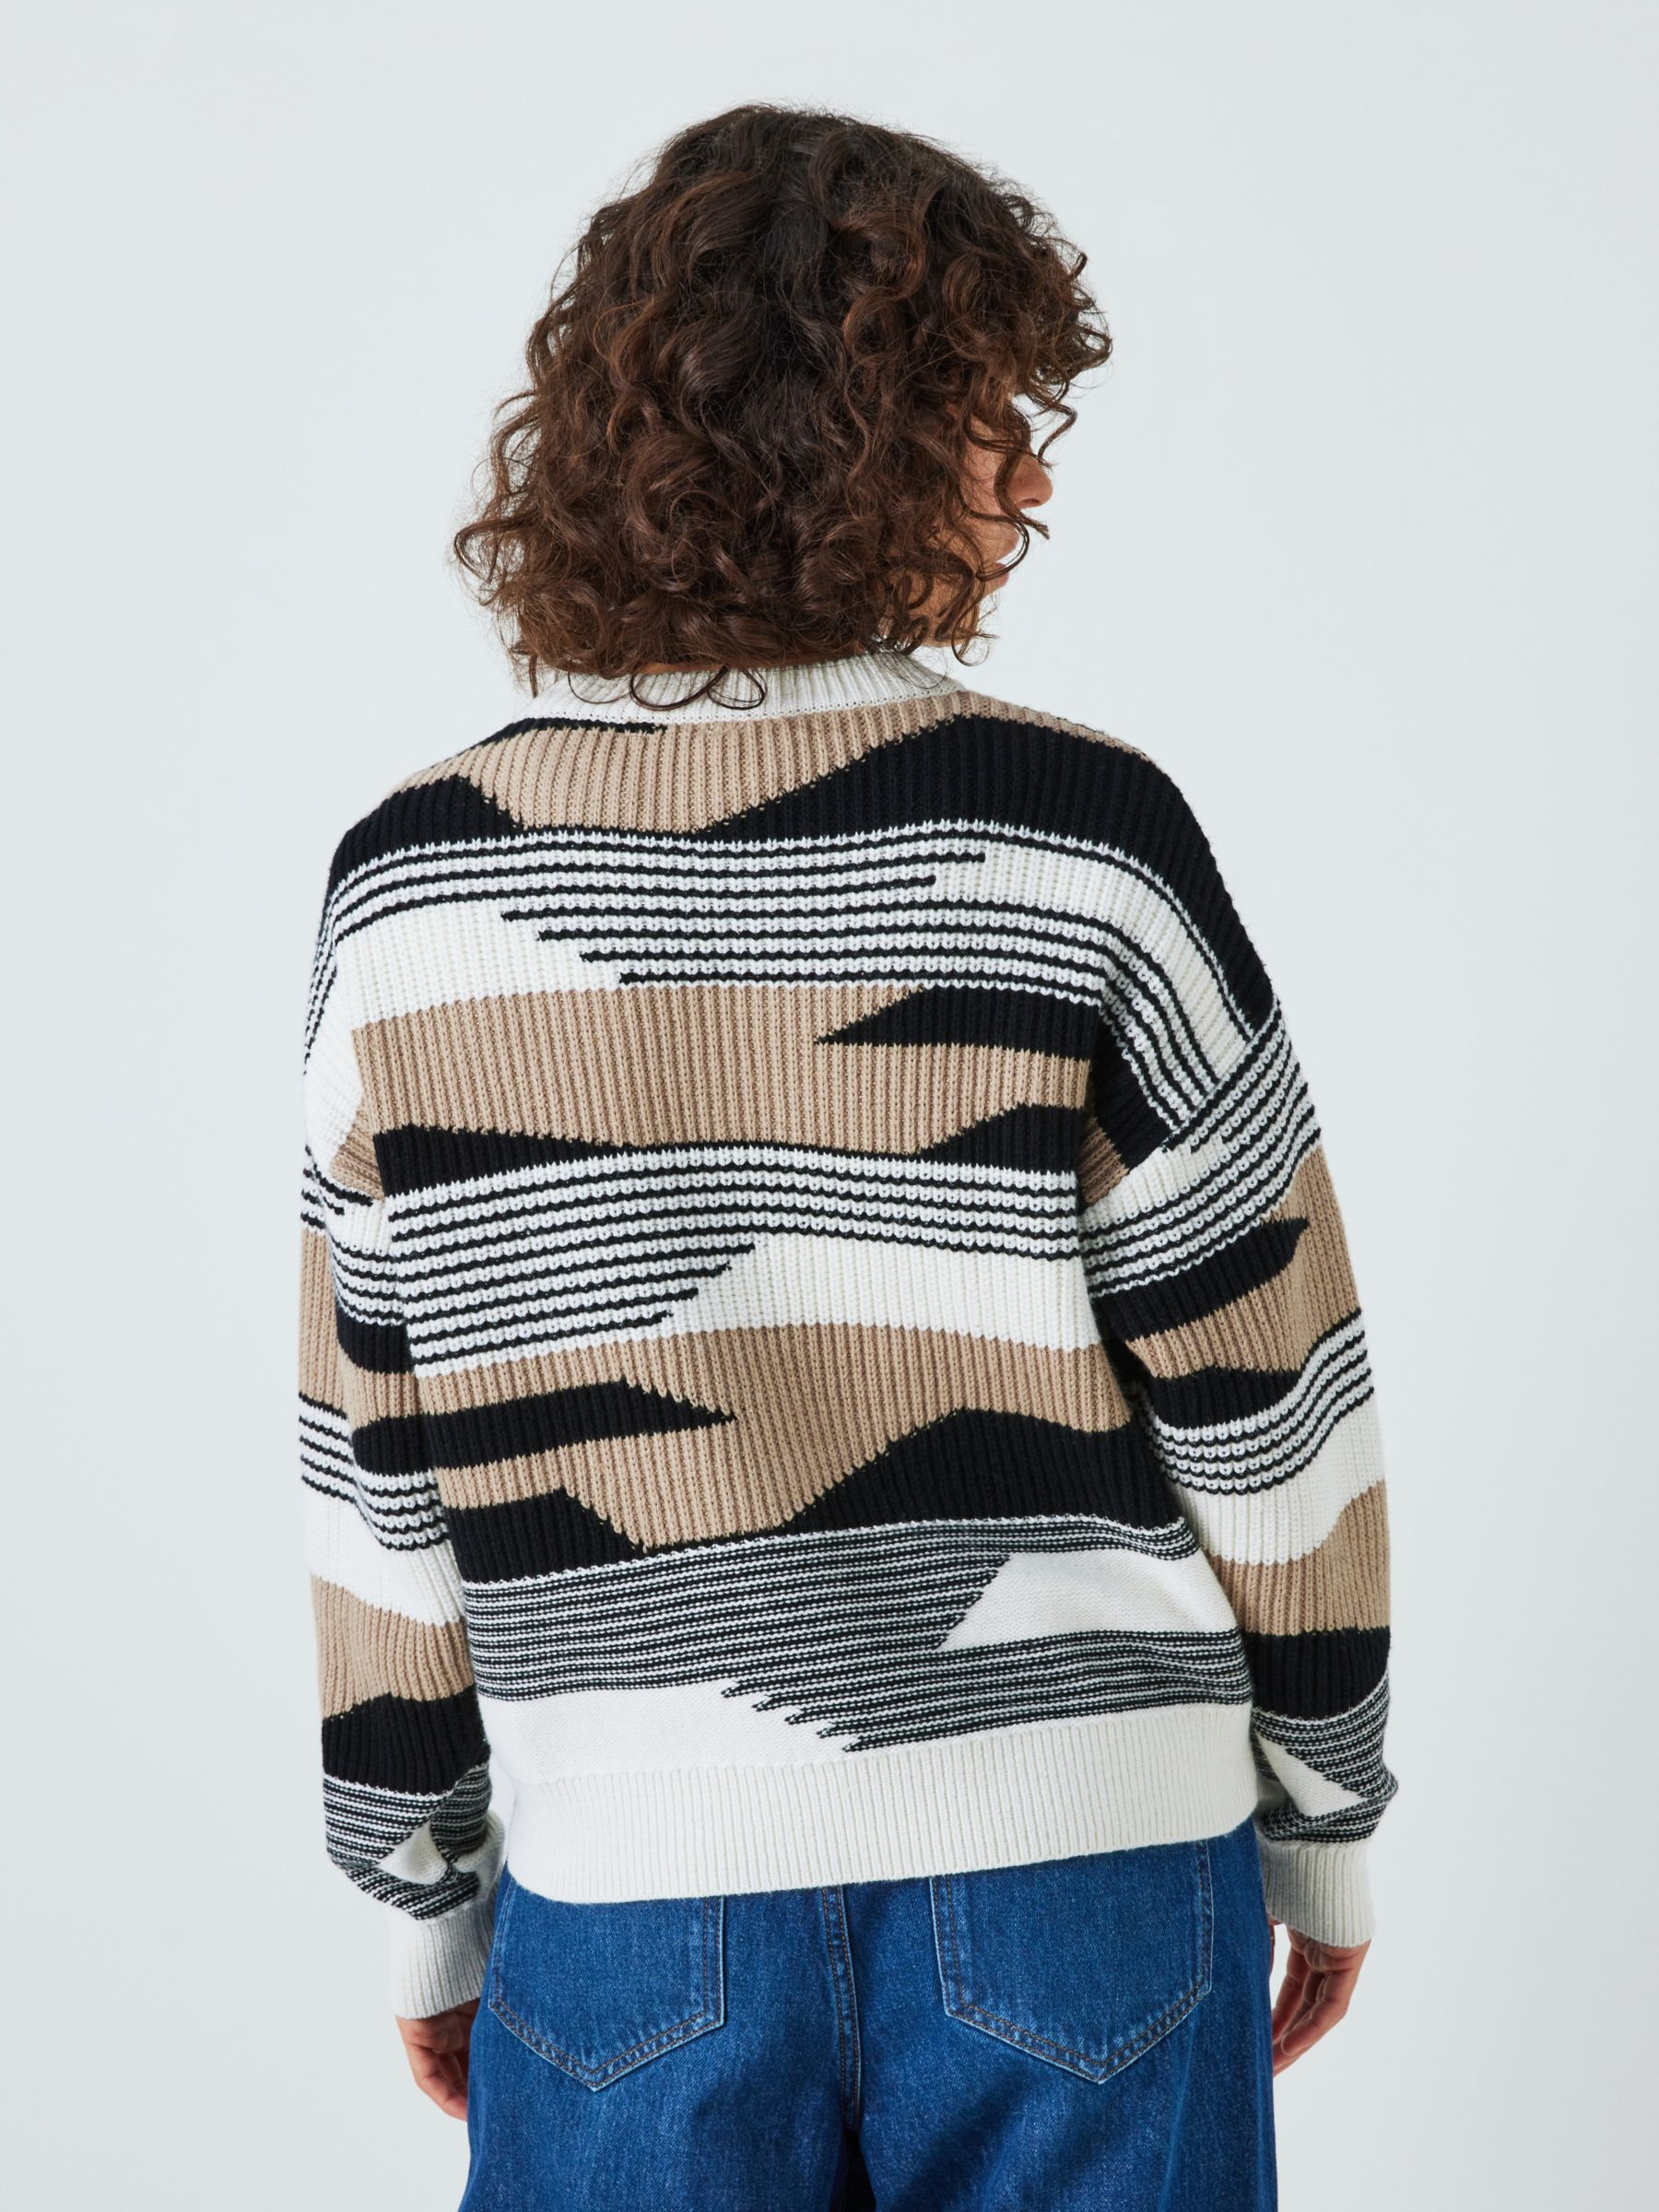 AND/OR Bonnie Abstract Stripe Wool Blend Jumper, Cream/Black, XS